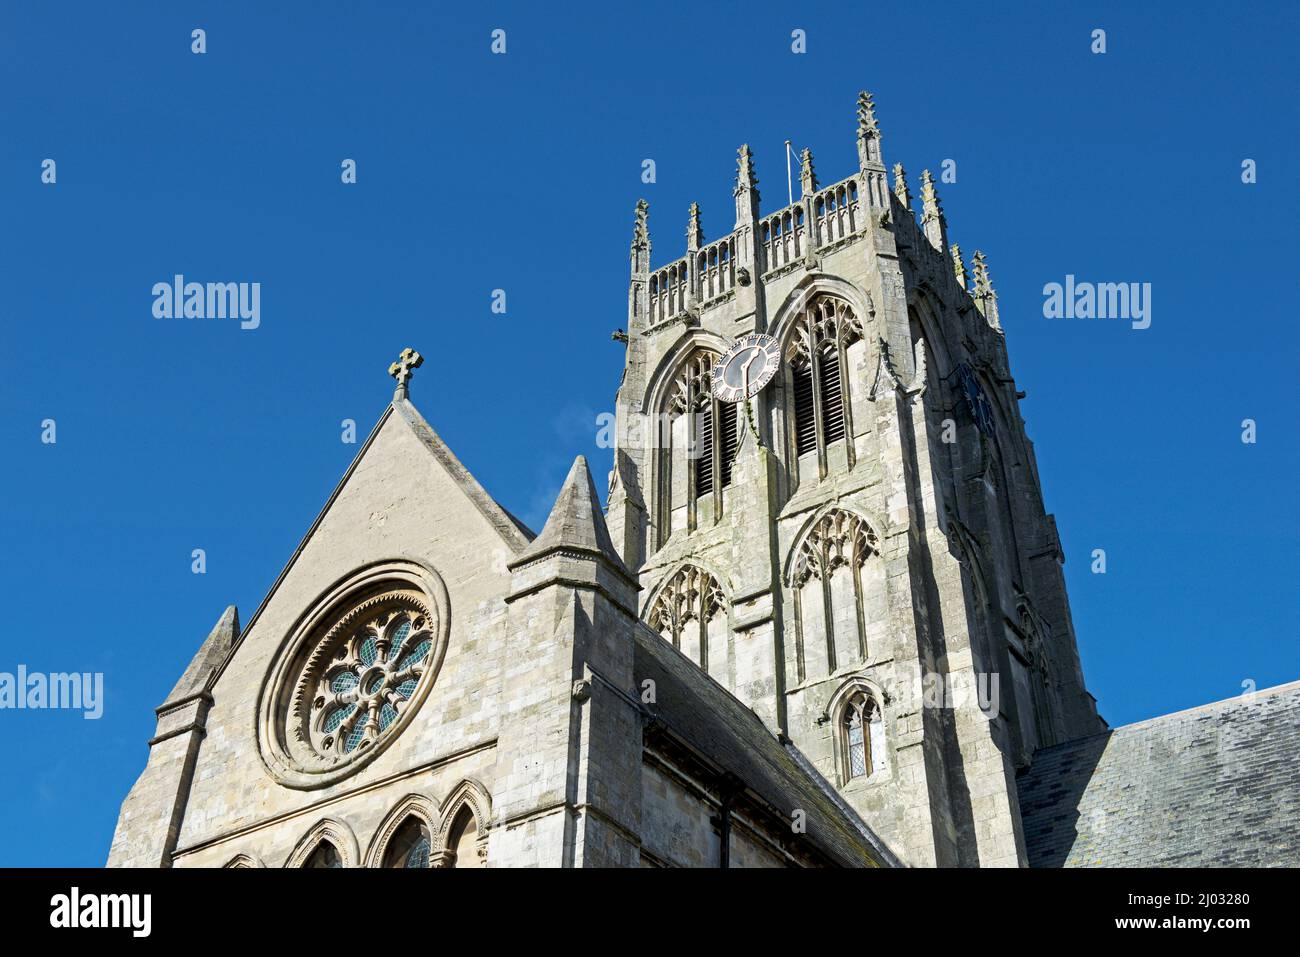 St Augustine's Church in Hedon, East Yorkshire, England UK Stock Photo